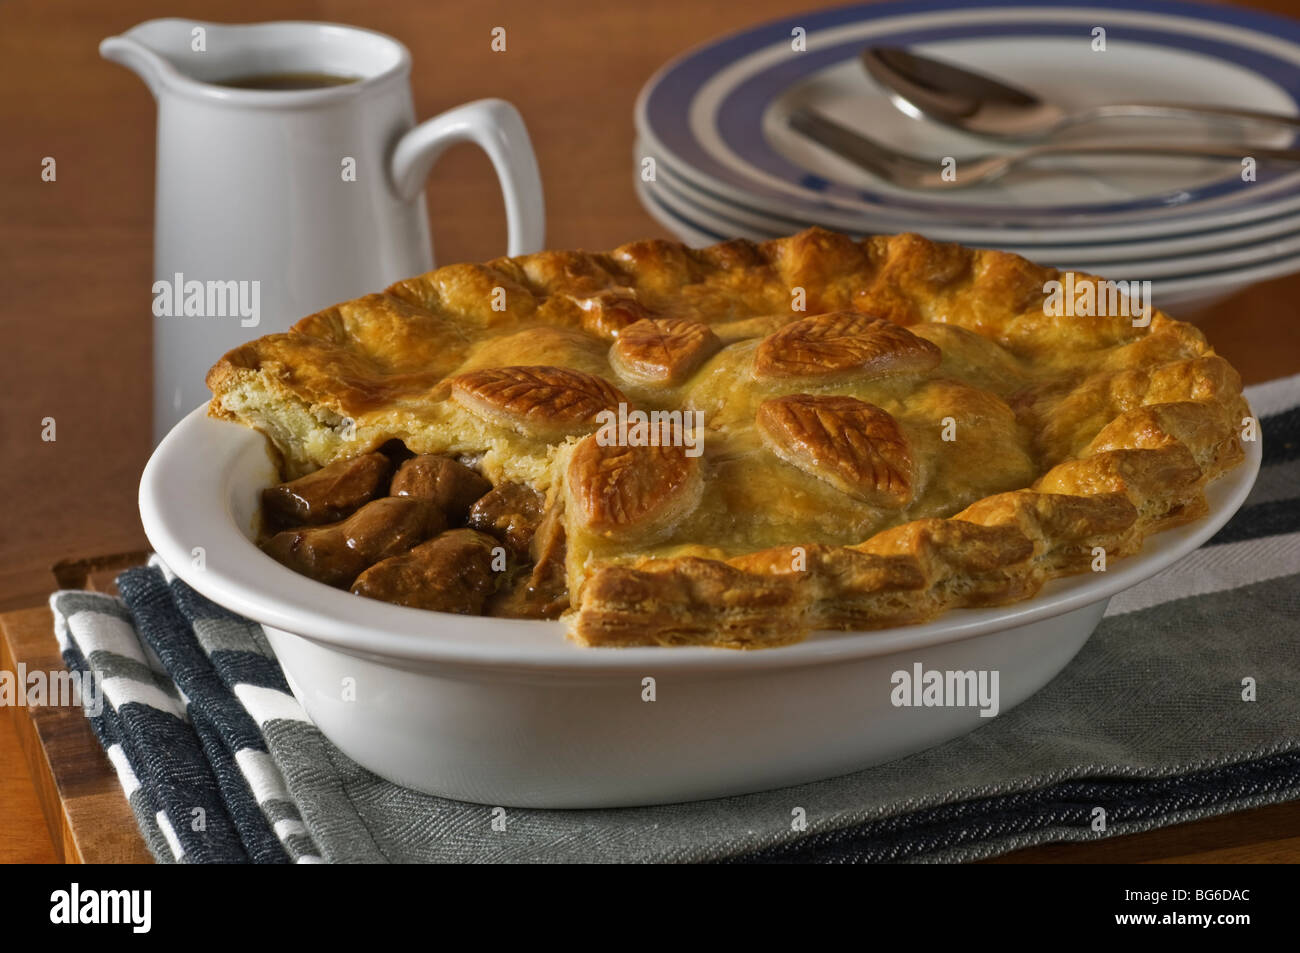 Steak and kidney pie Banque D'Images